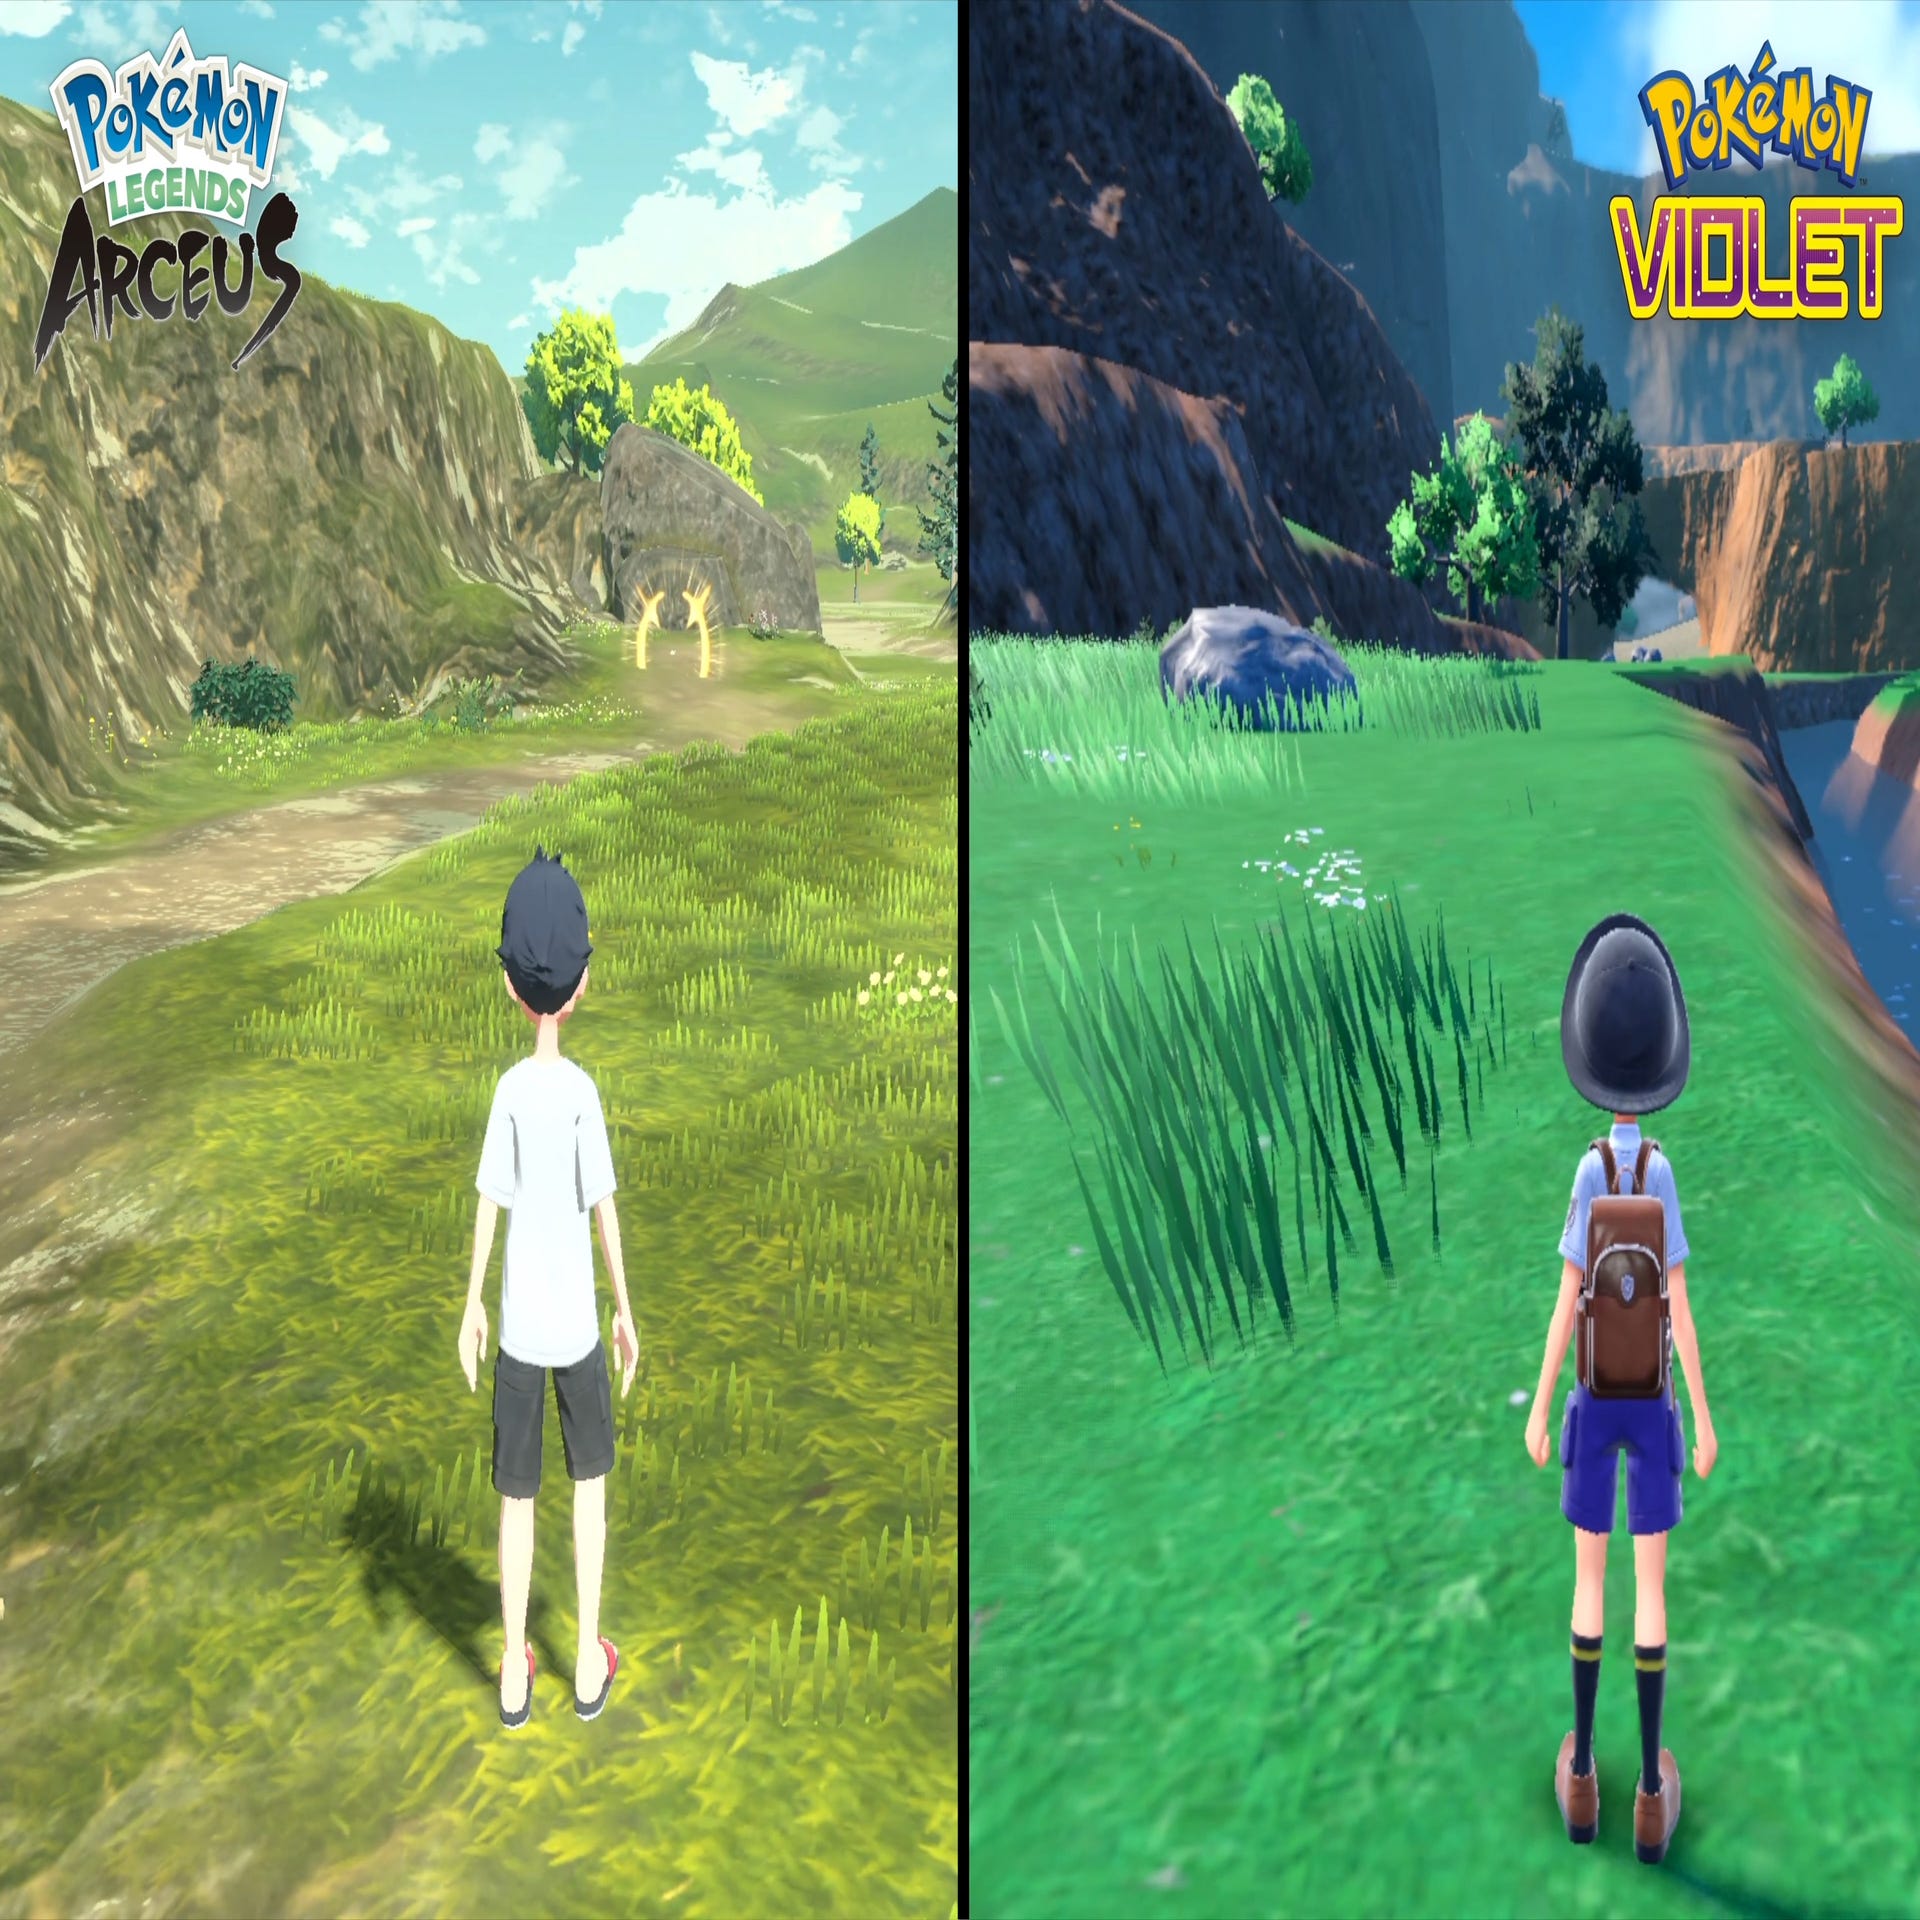 Pokémon Scarlet & Violet Bring Back Difficulty, but the Wrong Kind